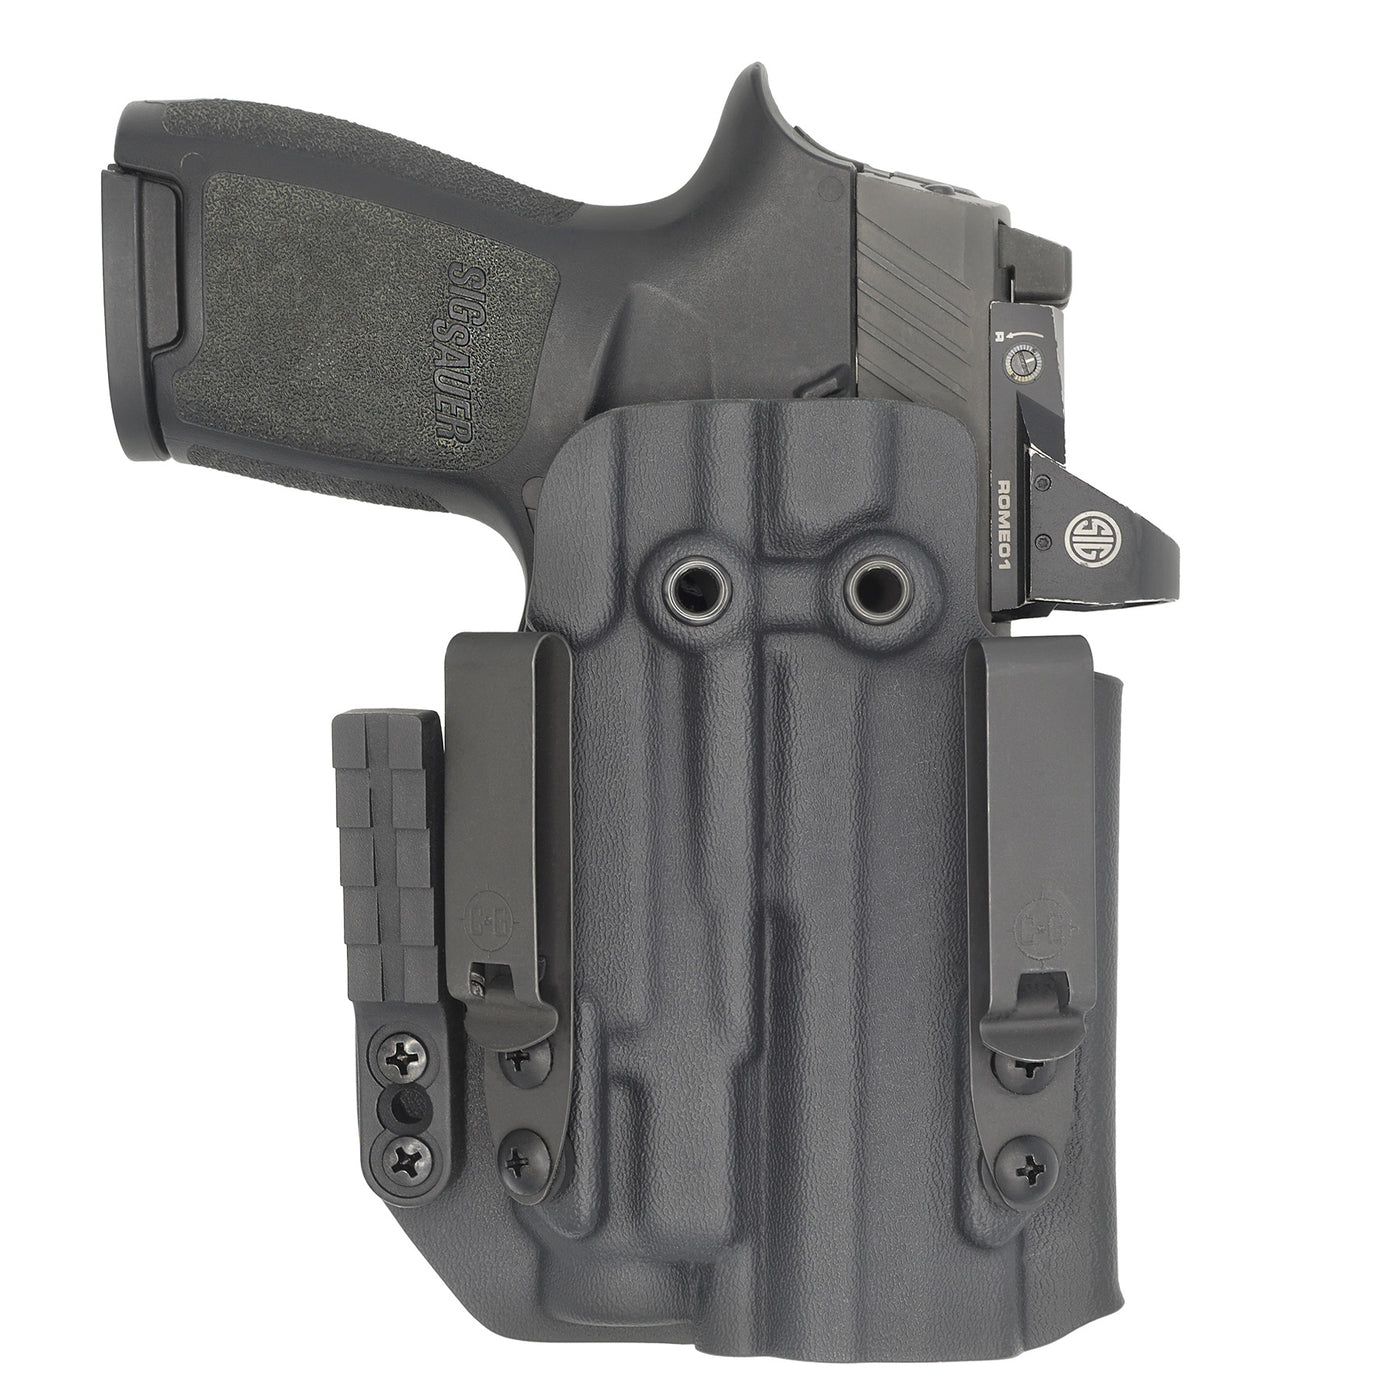 C&G Holsters quickship IWB ALPHA UPGRADE Tactical Masada Streamlight TLR7/a in holstered position